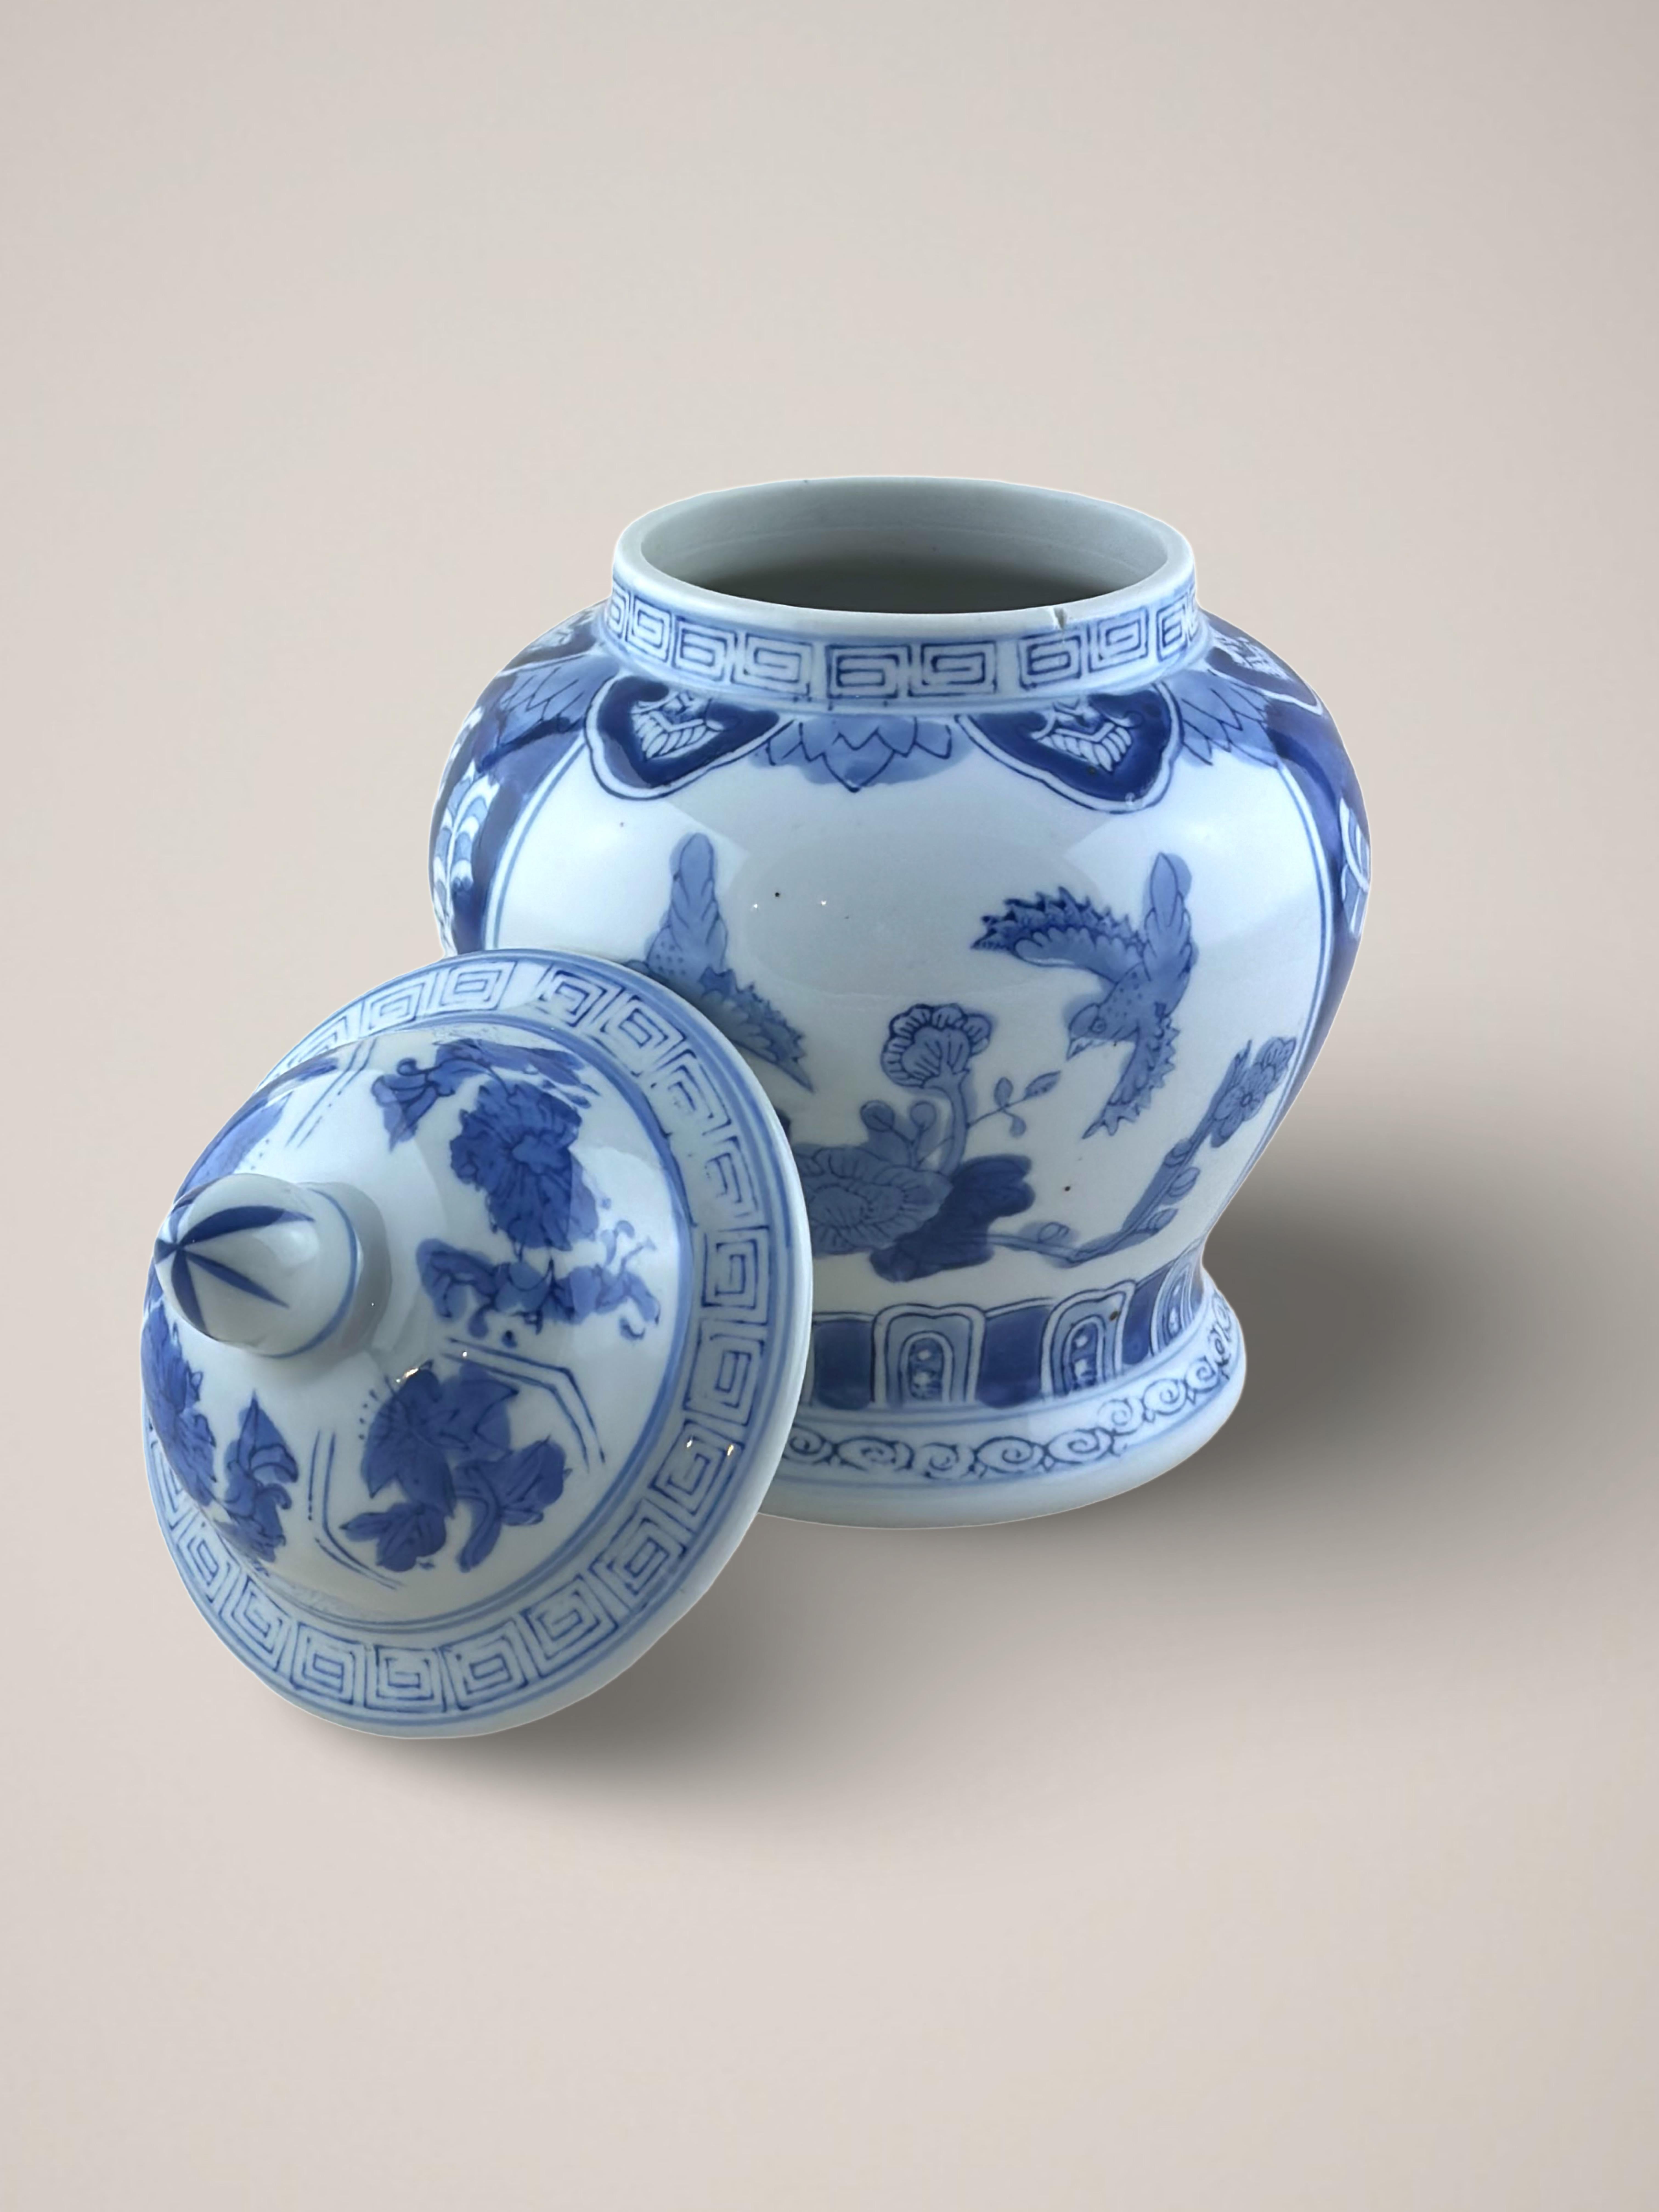 Vintage porcelain temple jar, handcrafted towards the end of the 20th century, in 1980s China

Artistically decorated in a simple yet decorative Ming-era style. Its body features a figural scene perfectly realized in hand-painted cobalt blue enamel.